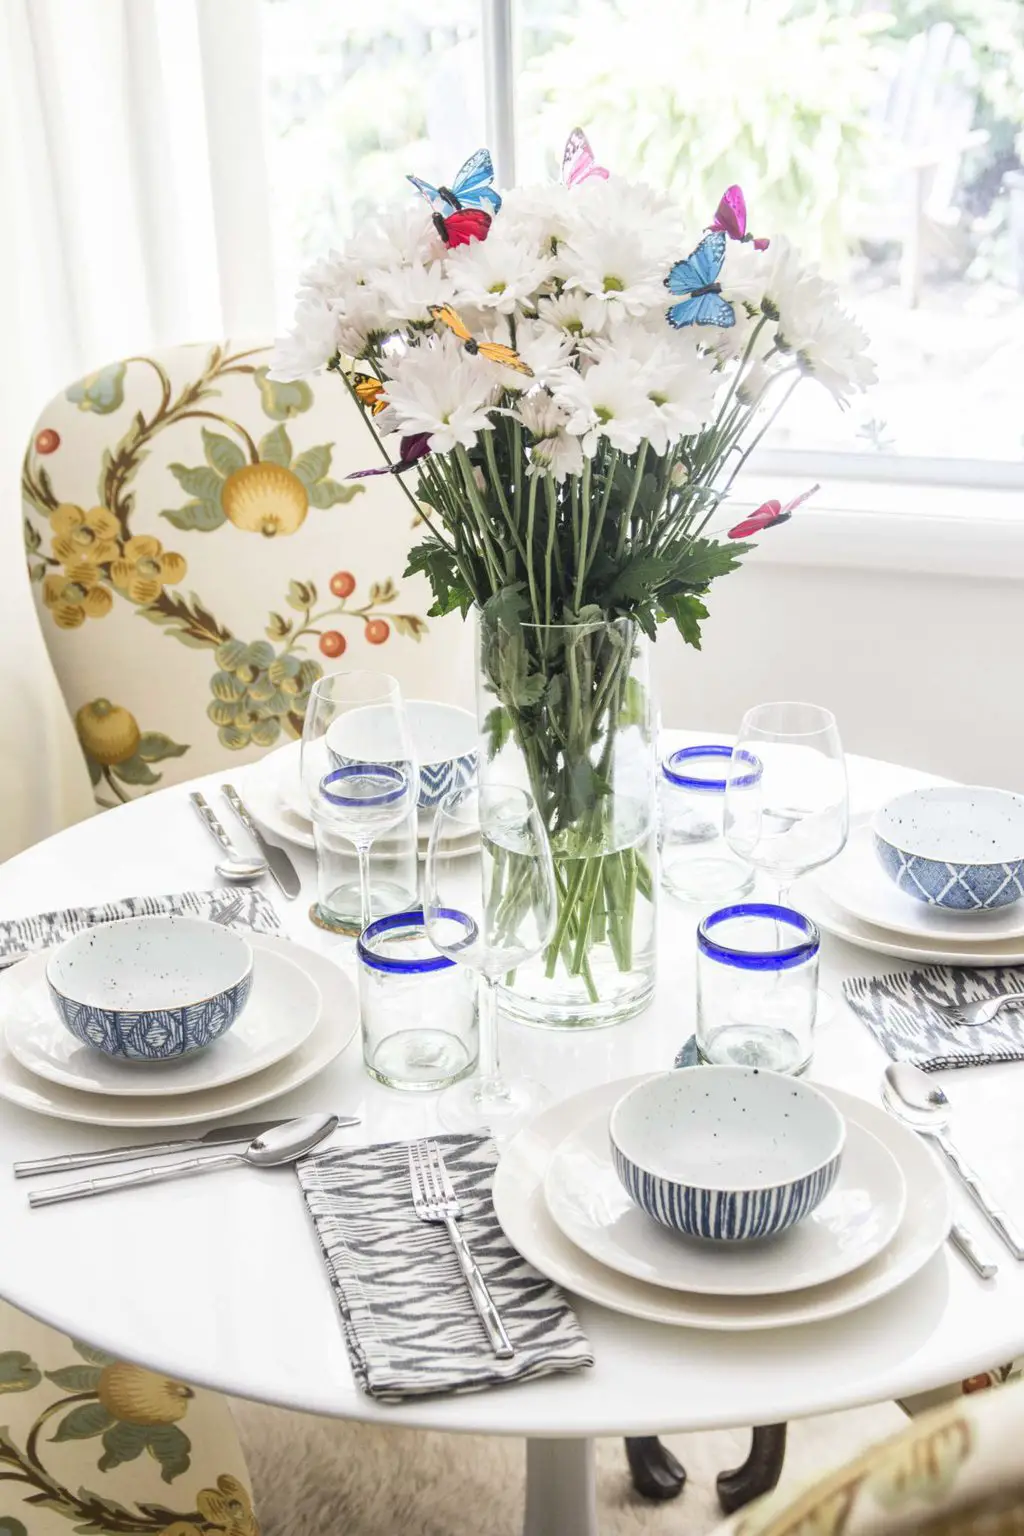 Pattern happy table setting with whimsical flower arrangement of daisies and butterflies on Thou Swell @thouswellblog